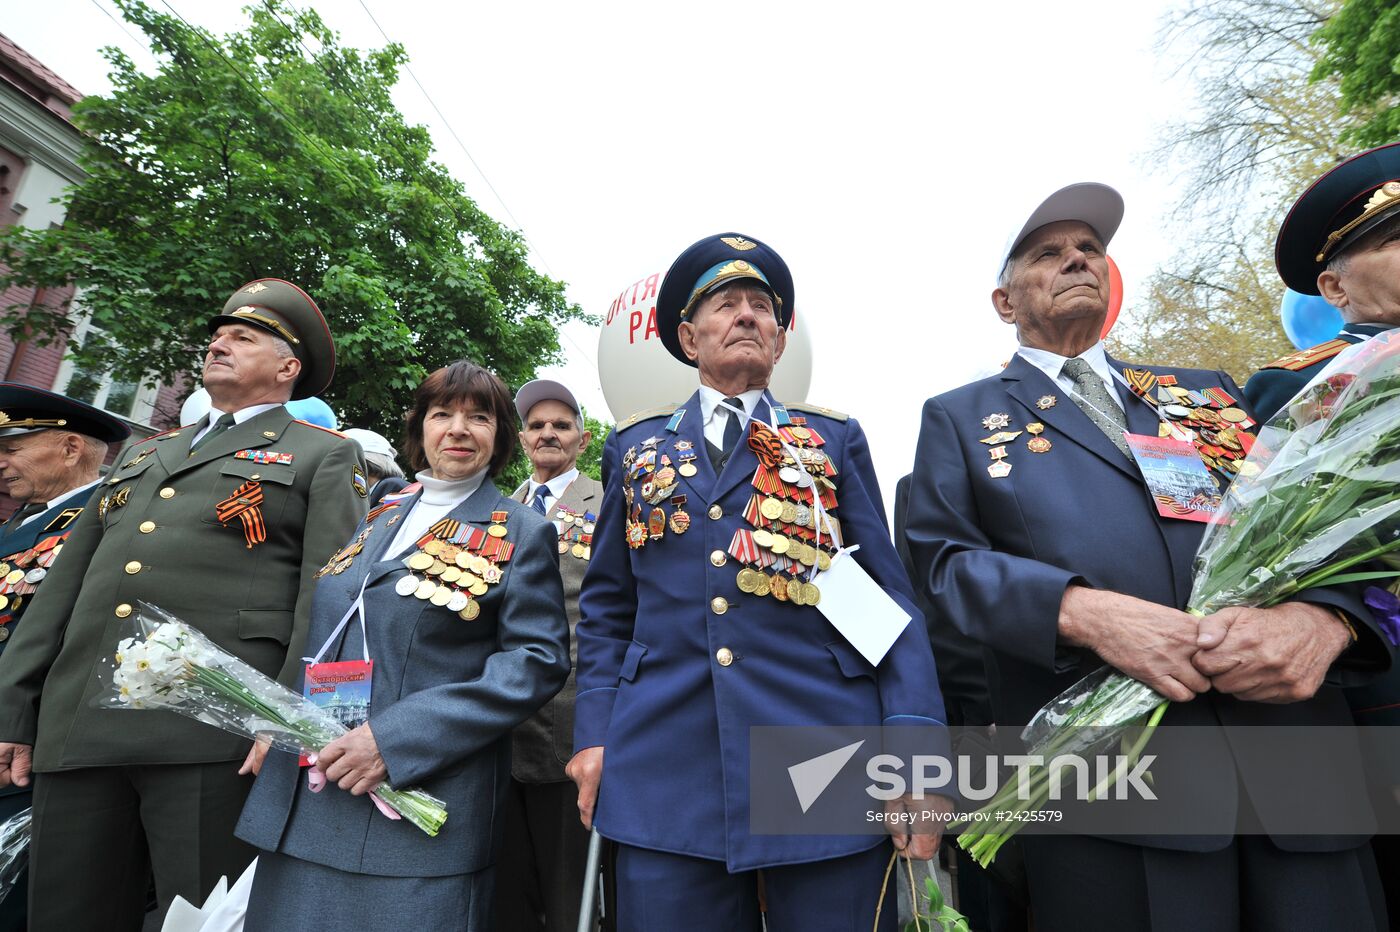 Russian regions celebrate Victory Day